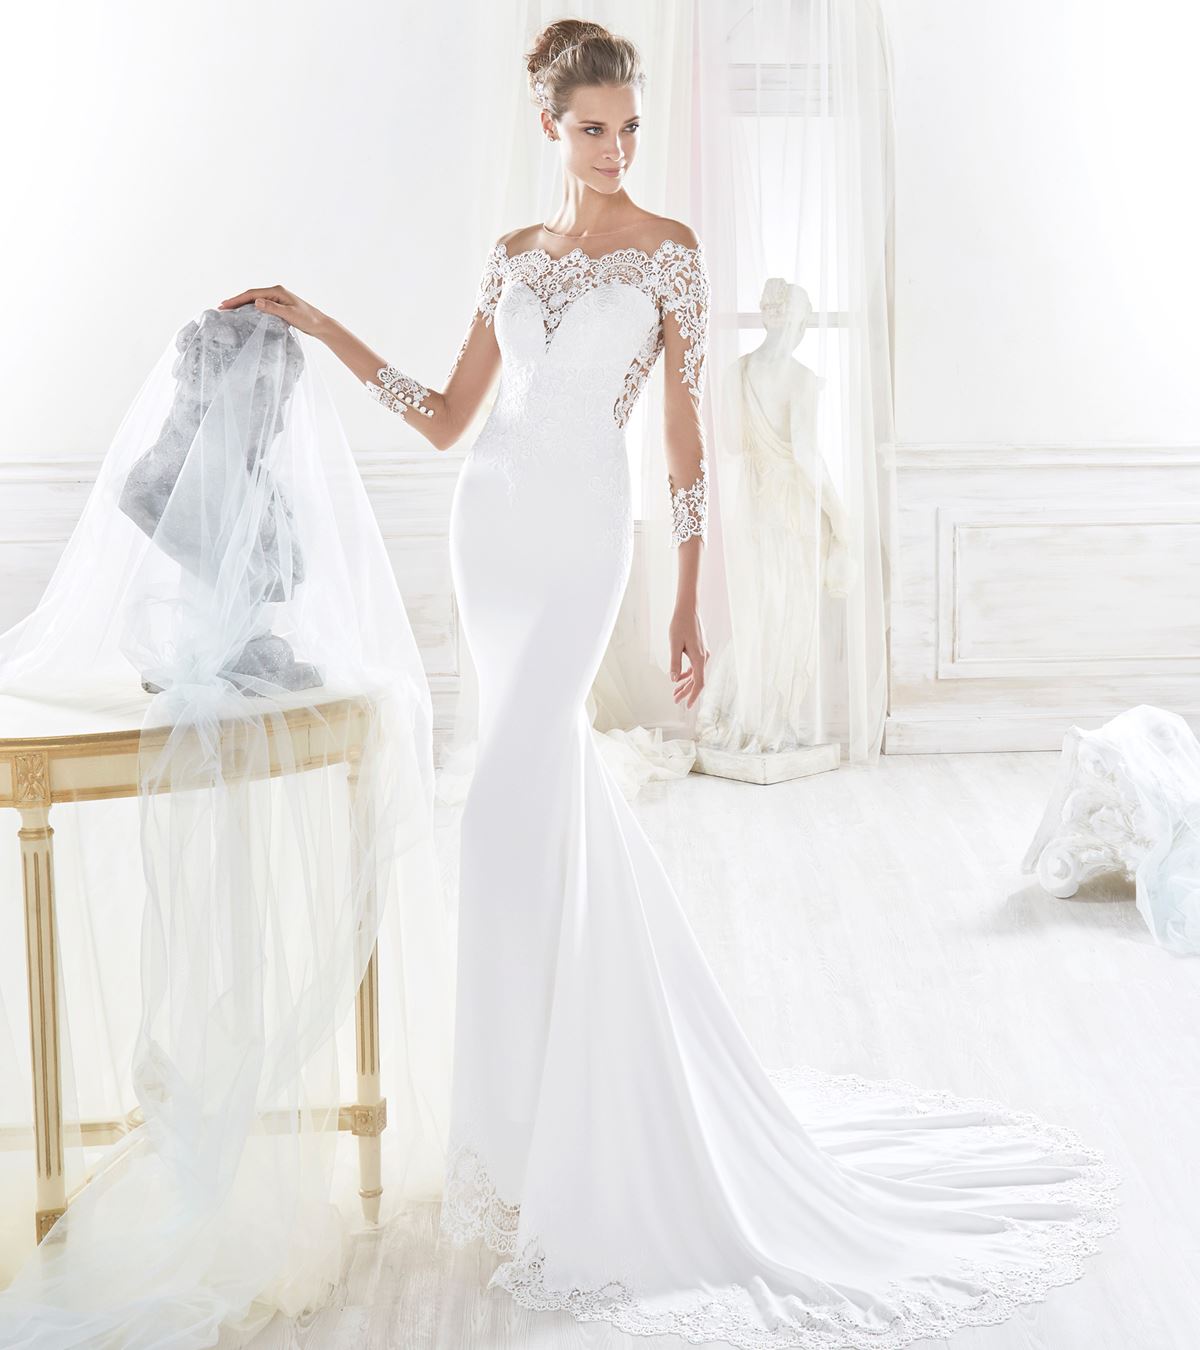 This Nicole Spose Wedding Dresses couples lace sleeves with an off the shoulder design.